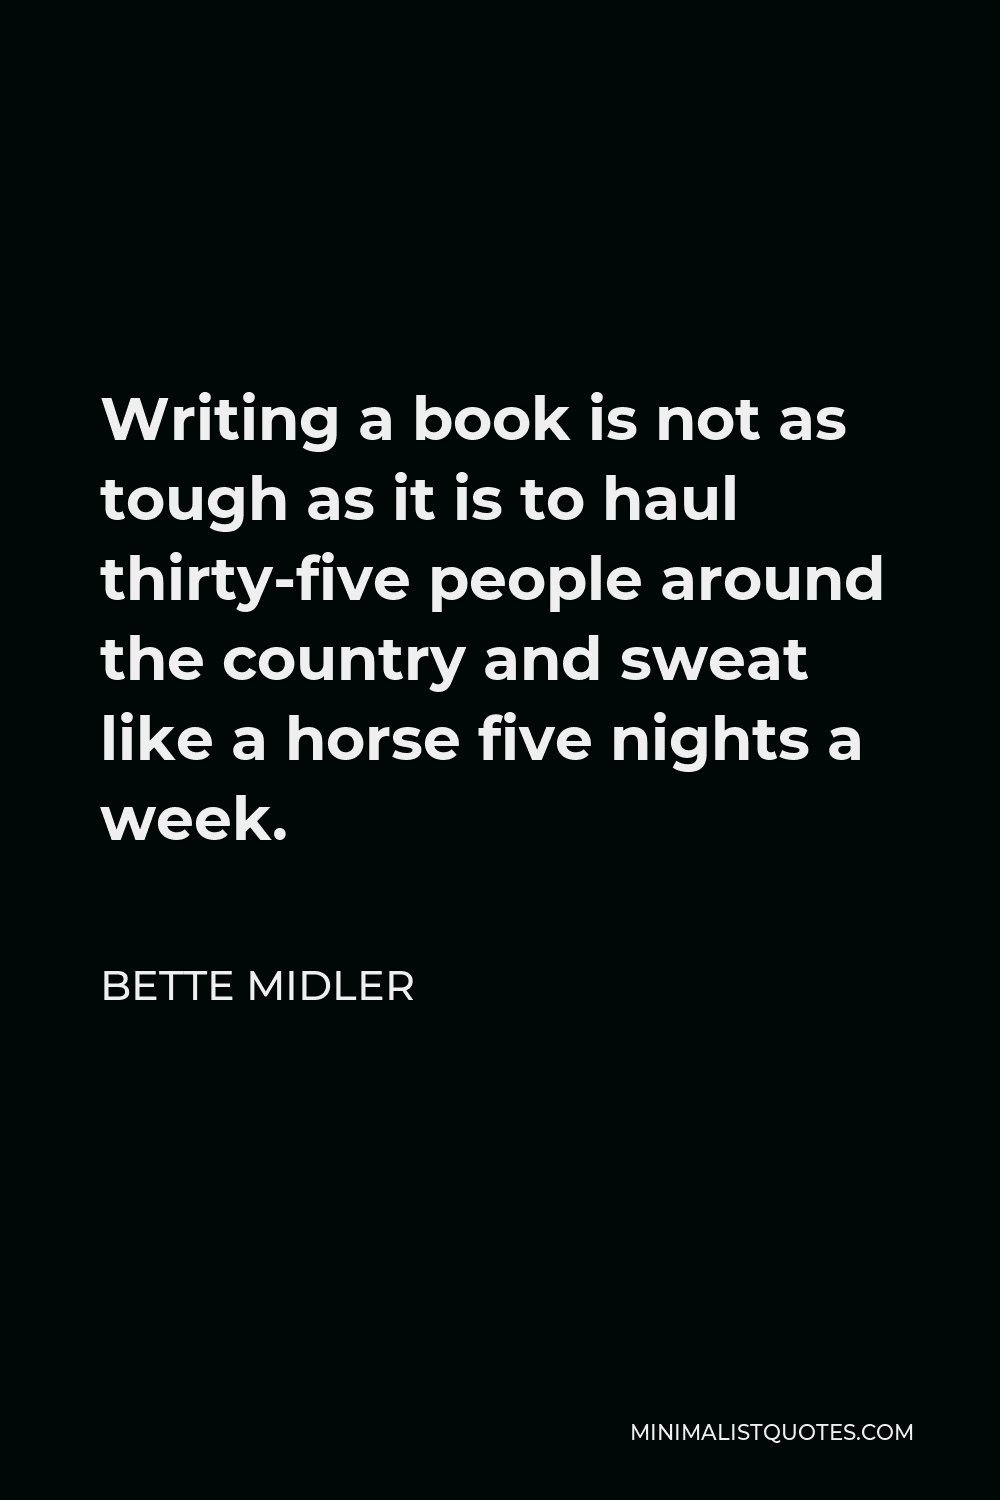 Bette Midler Quote - Writing a book is not as tough as it is to haul thirty-five people around the country and sweat like a horse five nights a week.